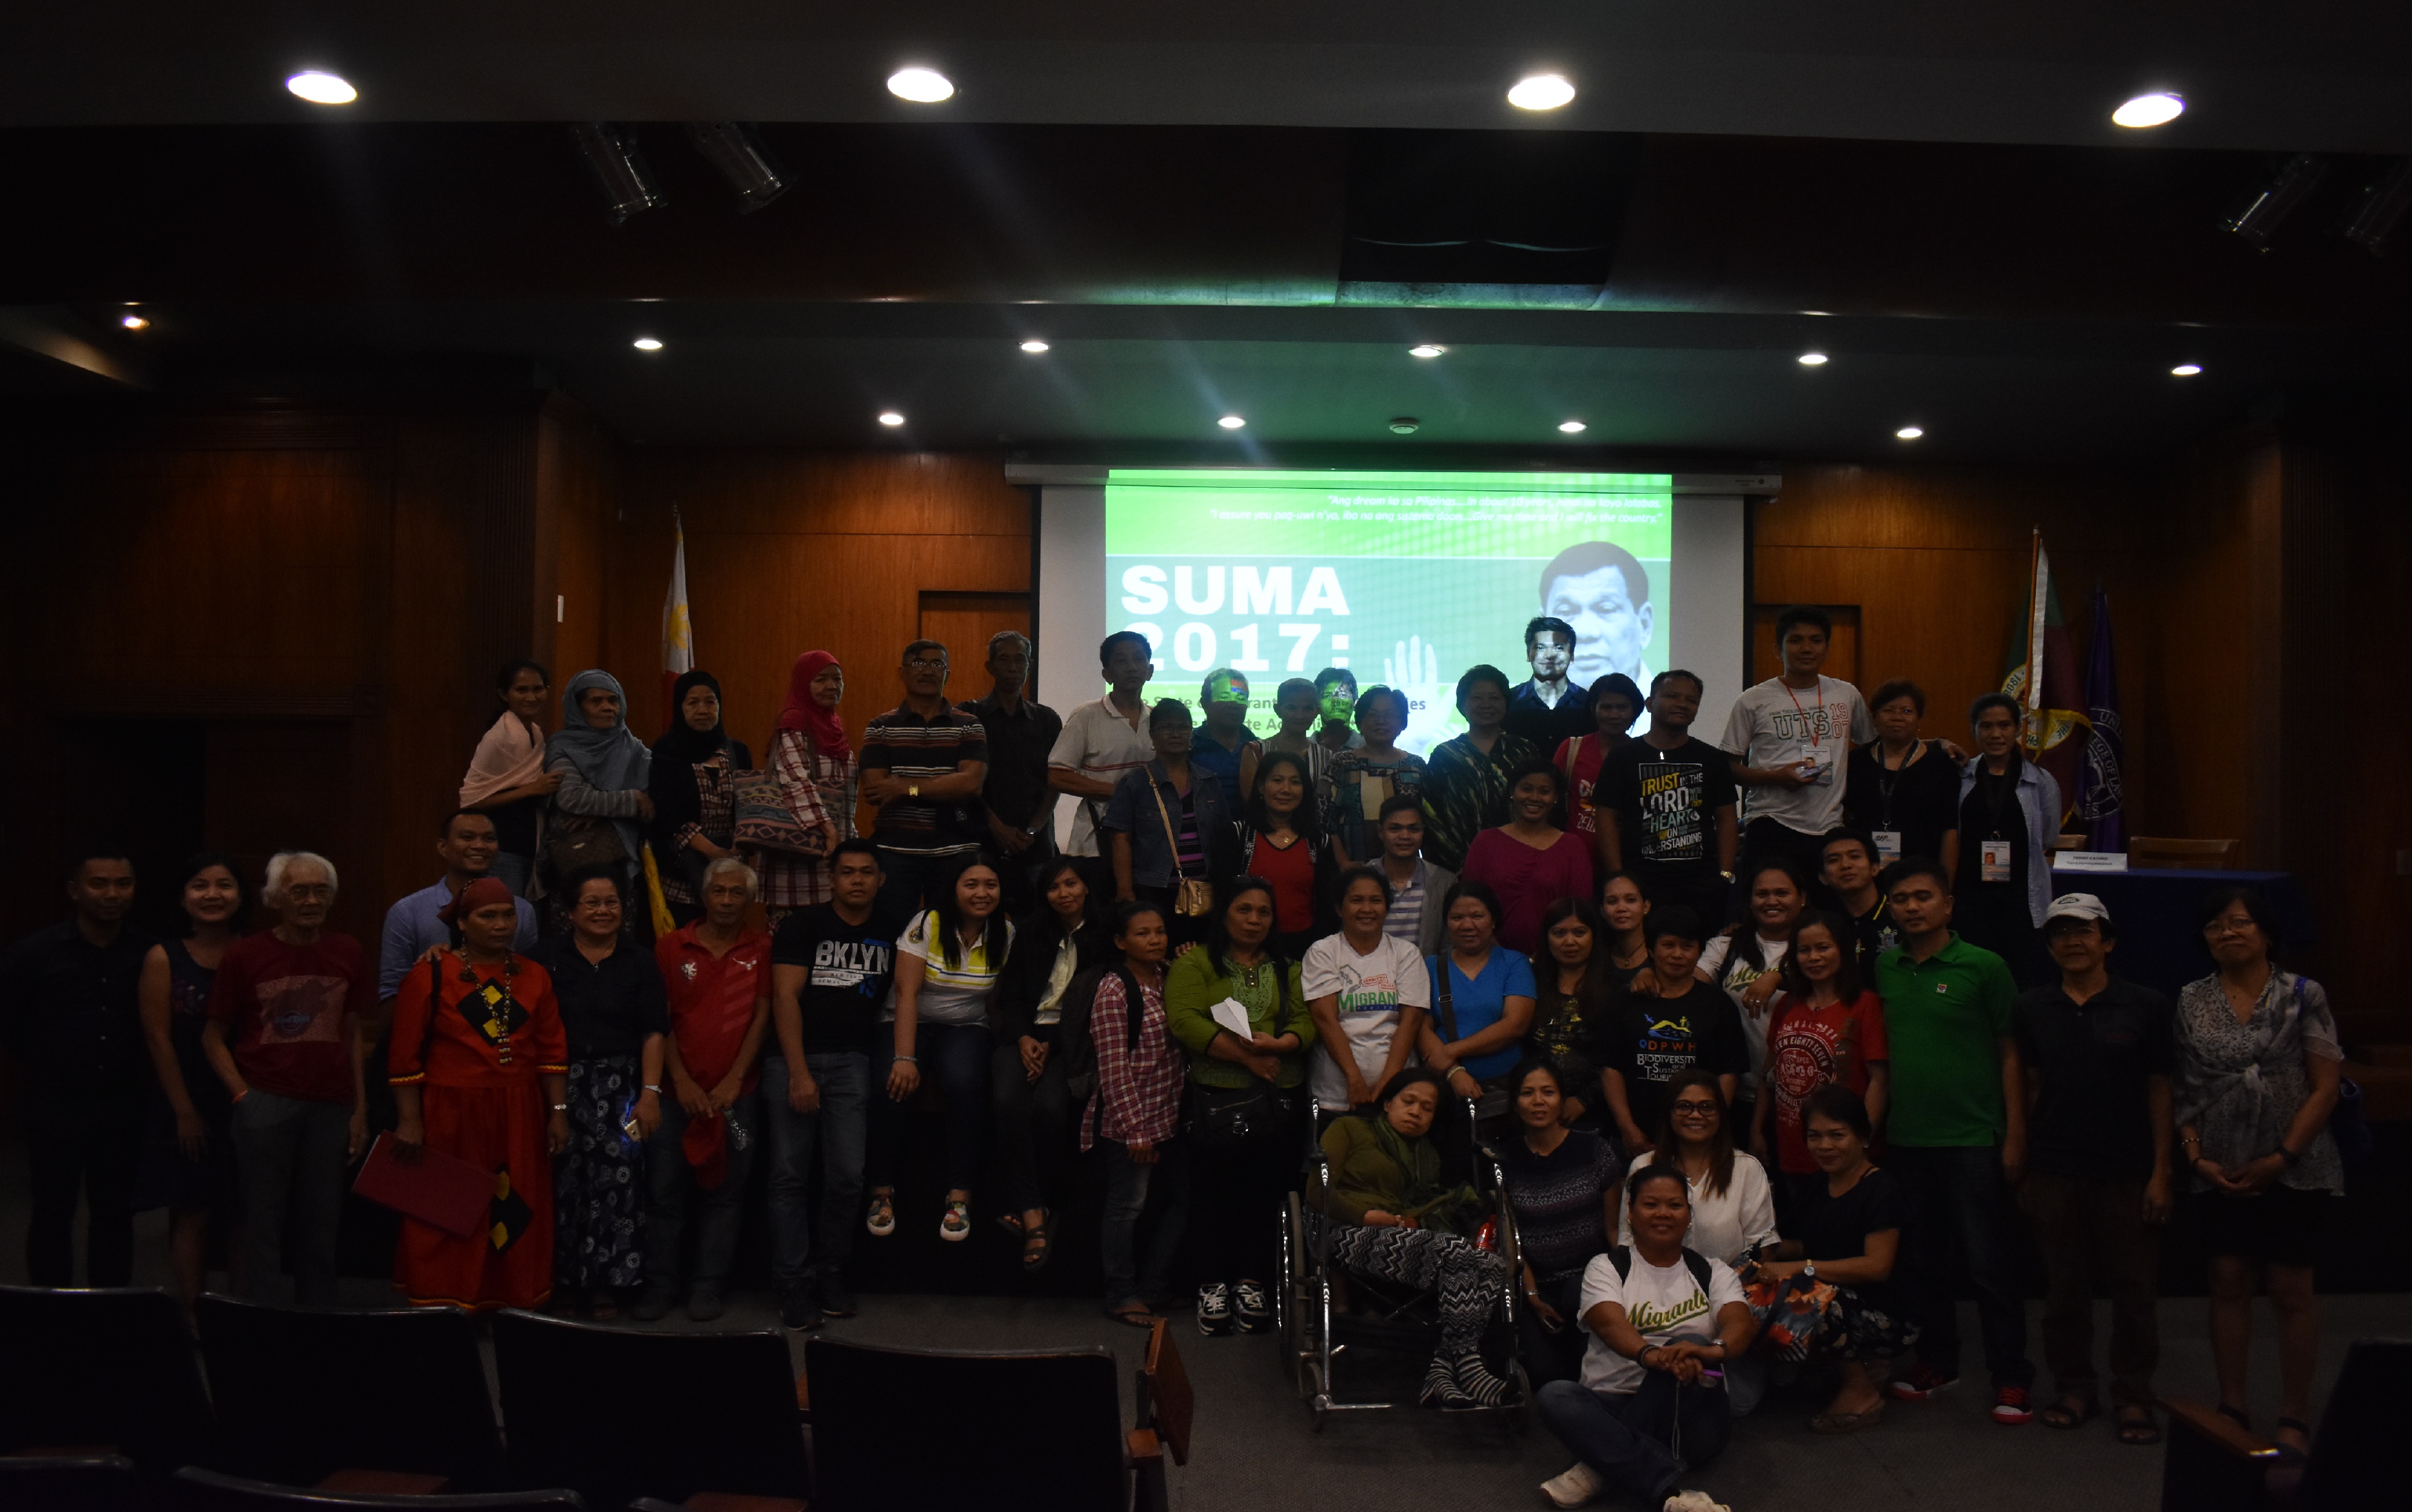 Migrante and other rights advocates after the Suma 2017 forum on June 7 (Photo by Ian Irving Bazarte/Bulatlat)